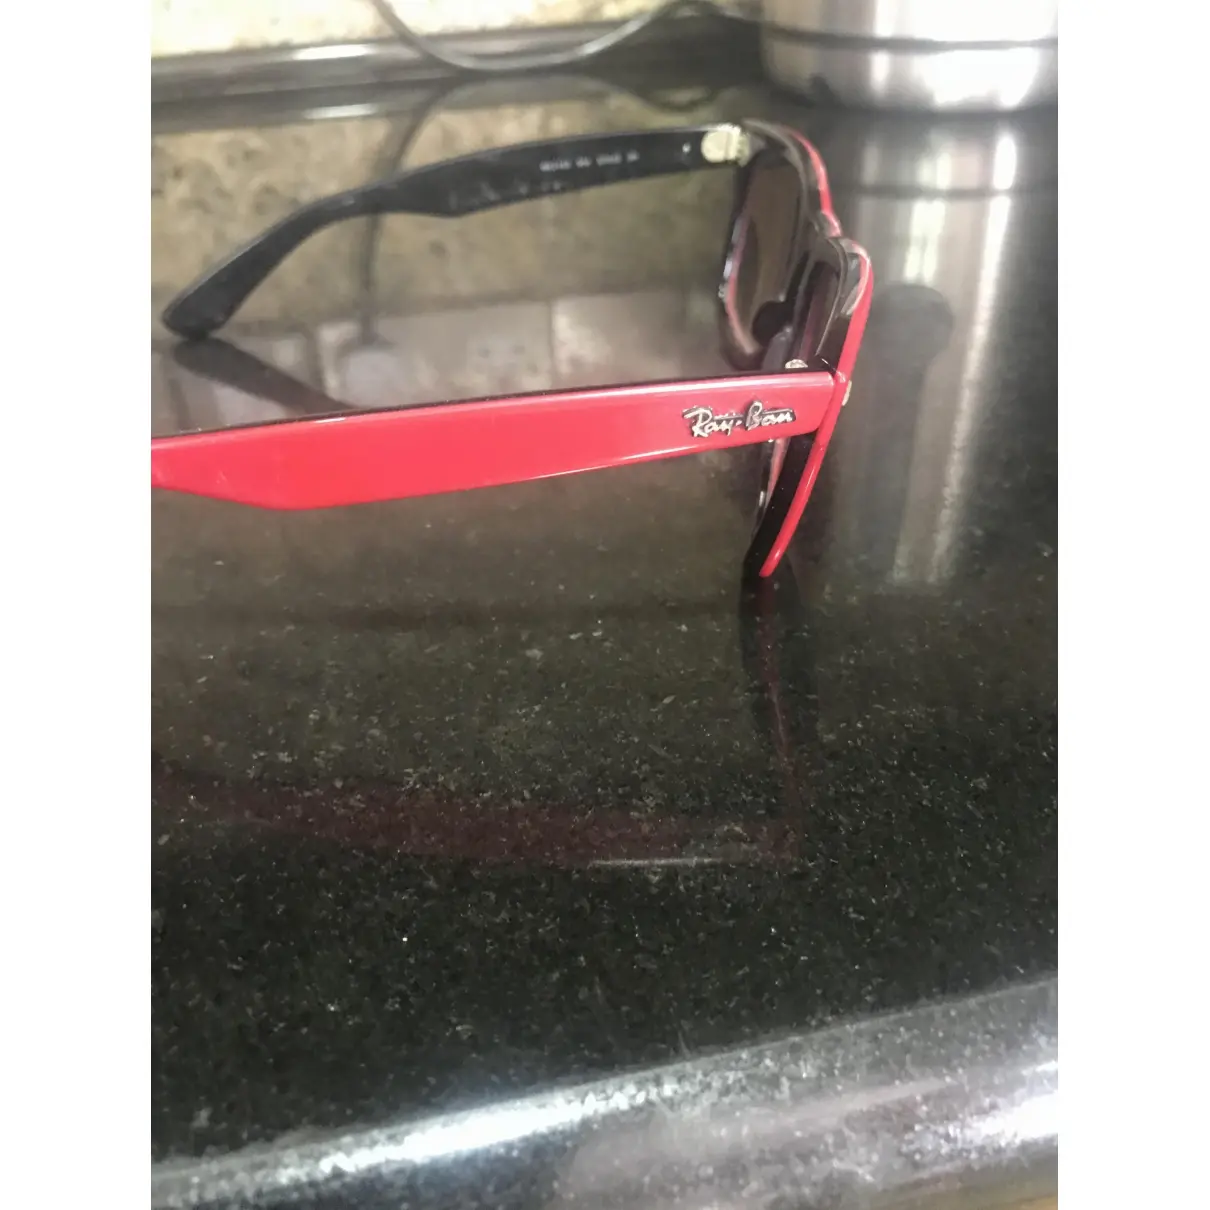 Ray-Ban Sunglasses for sale